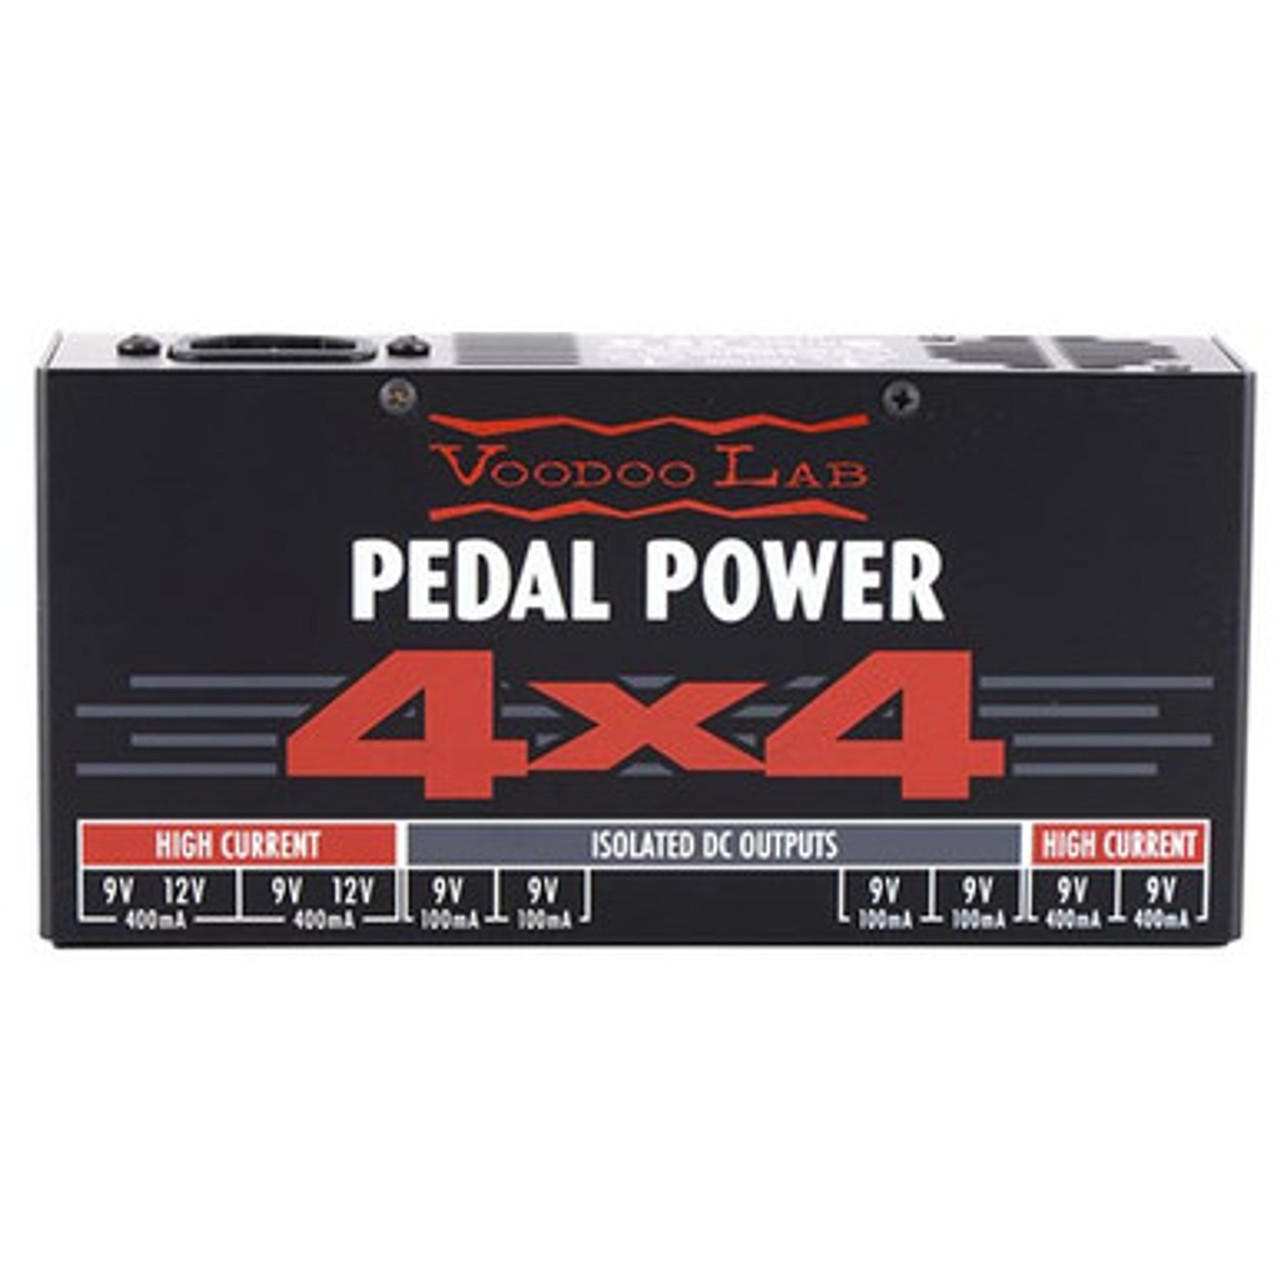 Voodoo Lab Pedal Power 4x4 Pedalboard Power Supply